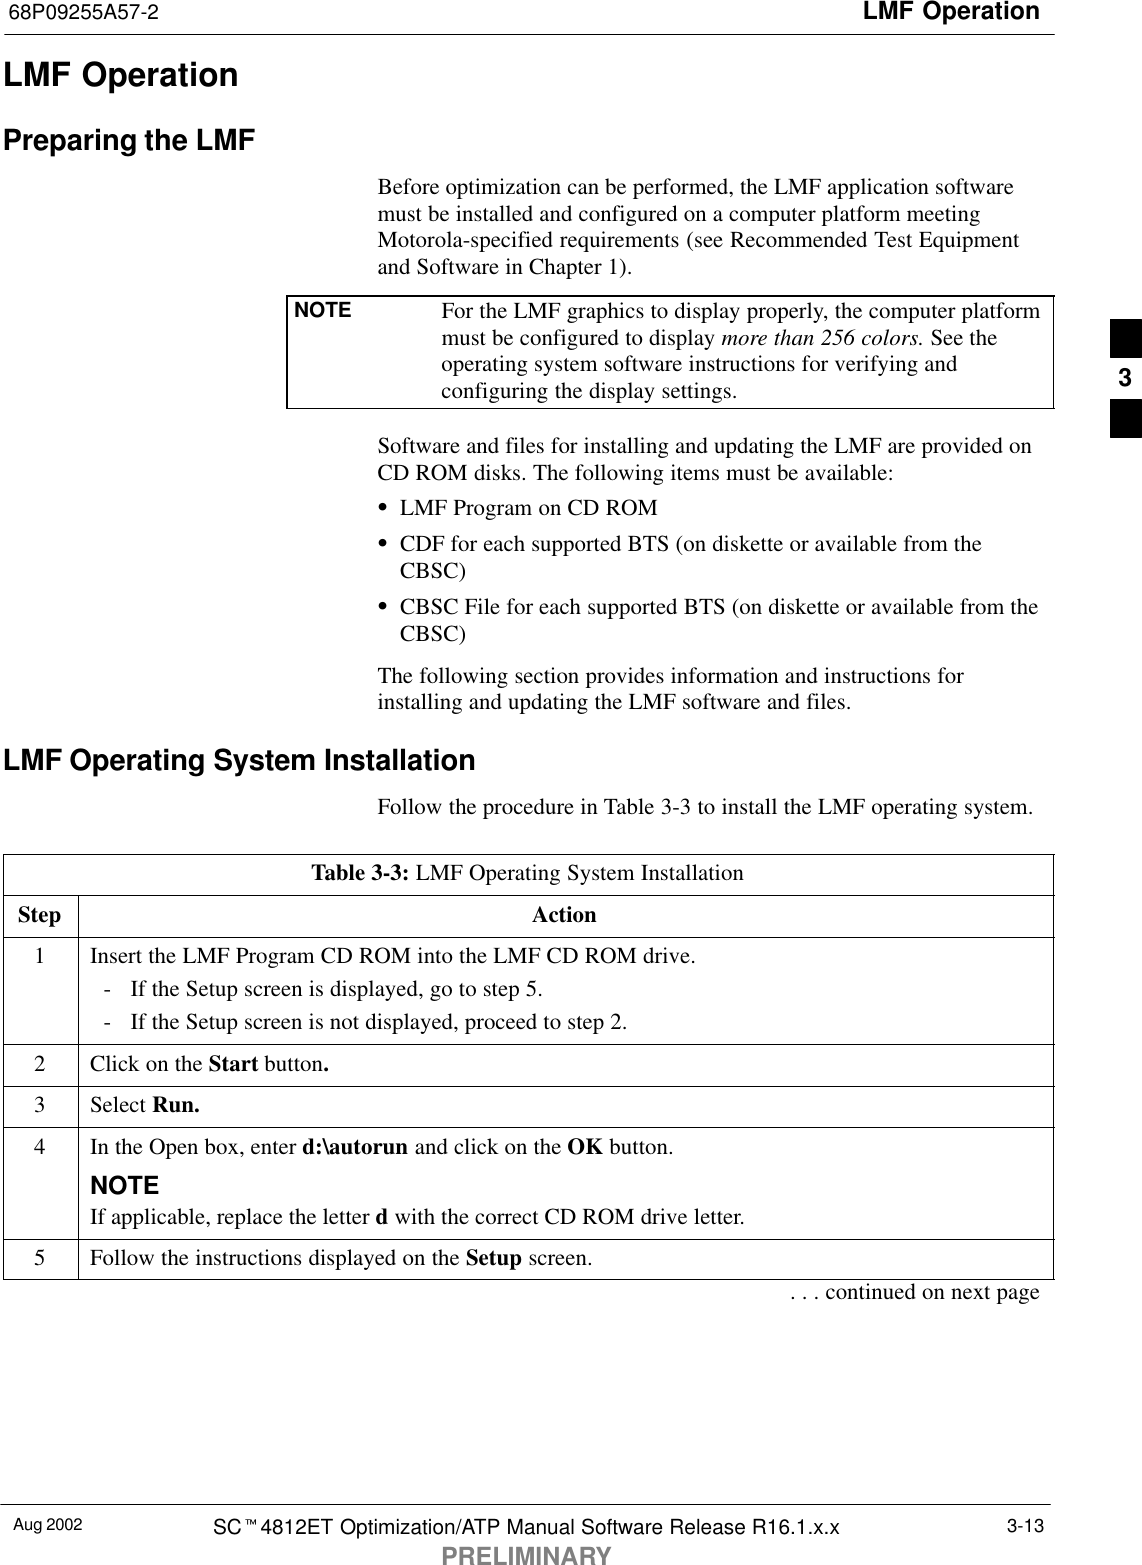 LMF Operation68P09255A57-2Aug 2002 SCt4812ET Optimization/ATP Manual Software Release R16.1.x.xPRELIMINARY3-13LMF OperationPreparing the LMFBefore optimization can be performed, the LMF application softwaremust be installed and configured on a computer platform meetingMotorola-specified requirements (see Recommended Test Equipmentand Software in Chapter 1).NOTE For the LMF graphics to display properly, the computer platformmust be configured to display more than 256 colors. See theoperating system software instructions for verifying andconfiguring the display settings.Software and files for installing and updating the LMF are provided onCD ROM disks. The following items must be available:SLMF Program on CD ROMSCDF for each supported BTS (on diskette or available from theCBSC)SCBSC File for each supported BTS (on diskette or available from theCBSC)The following section provides information and instructions forinstalling and updating the LMF software and files.LMF Operating System InstallationFollow the procedure in Table 3-3 to install the LMF operating system.Table 3-3: LMF Operating System InstallationStep Action1Insert the LMF Program CD ROM into the LMF CD ROM drive.- If the Setup screen is displayed, go to step 5.- If the Setup screen is not displayed, proceed to step 2.2Click on the Start button.3 Select Run.4In the Open box, enter d:\autorun and click on the OK button.NOTEIf applicable, replace the letter d with the correct CD ROM drive letter.5Follow the instructions displayed on the Setup screen.. . . continued on next page3